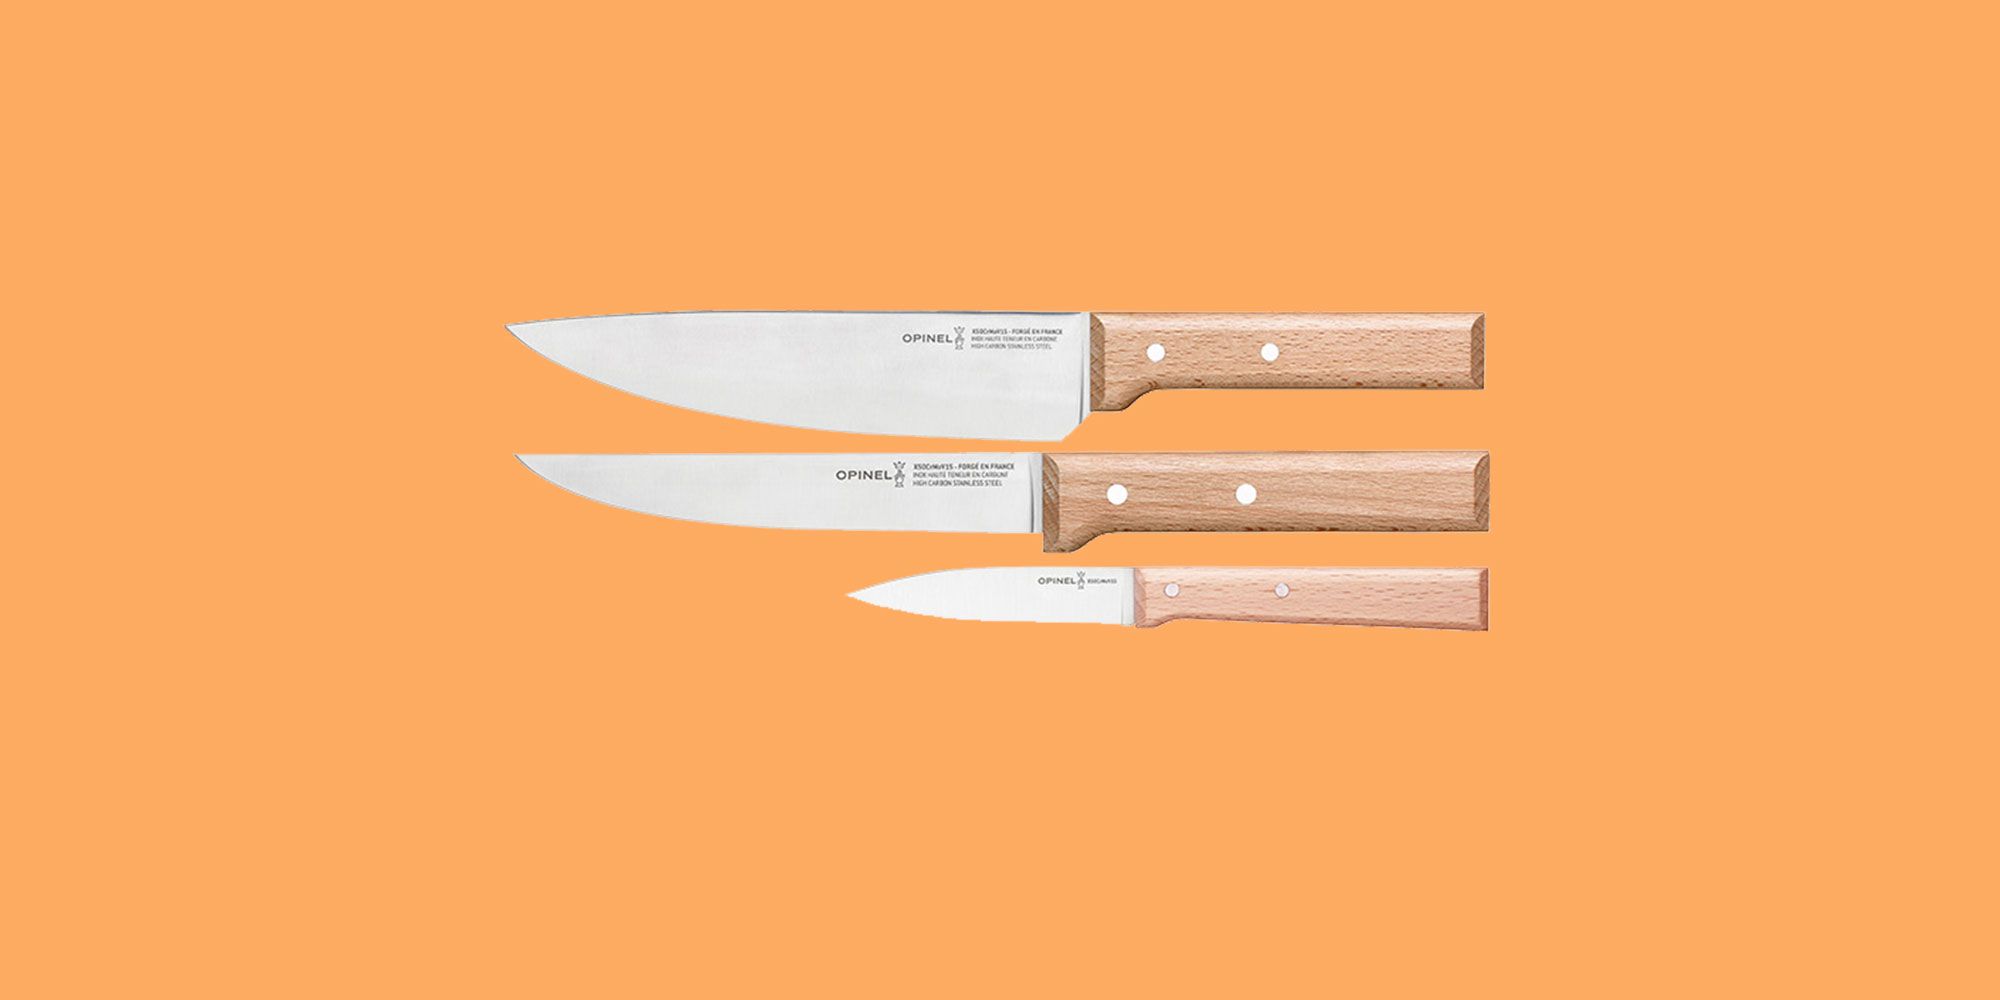 Material | The Trio of Knives